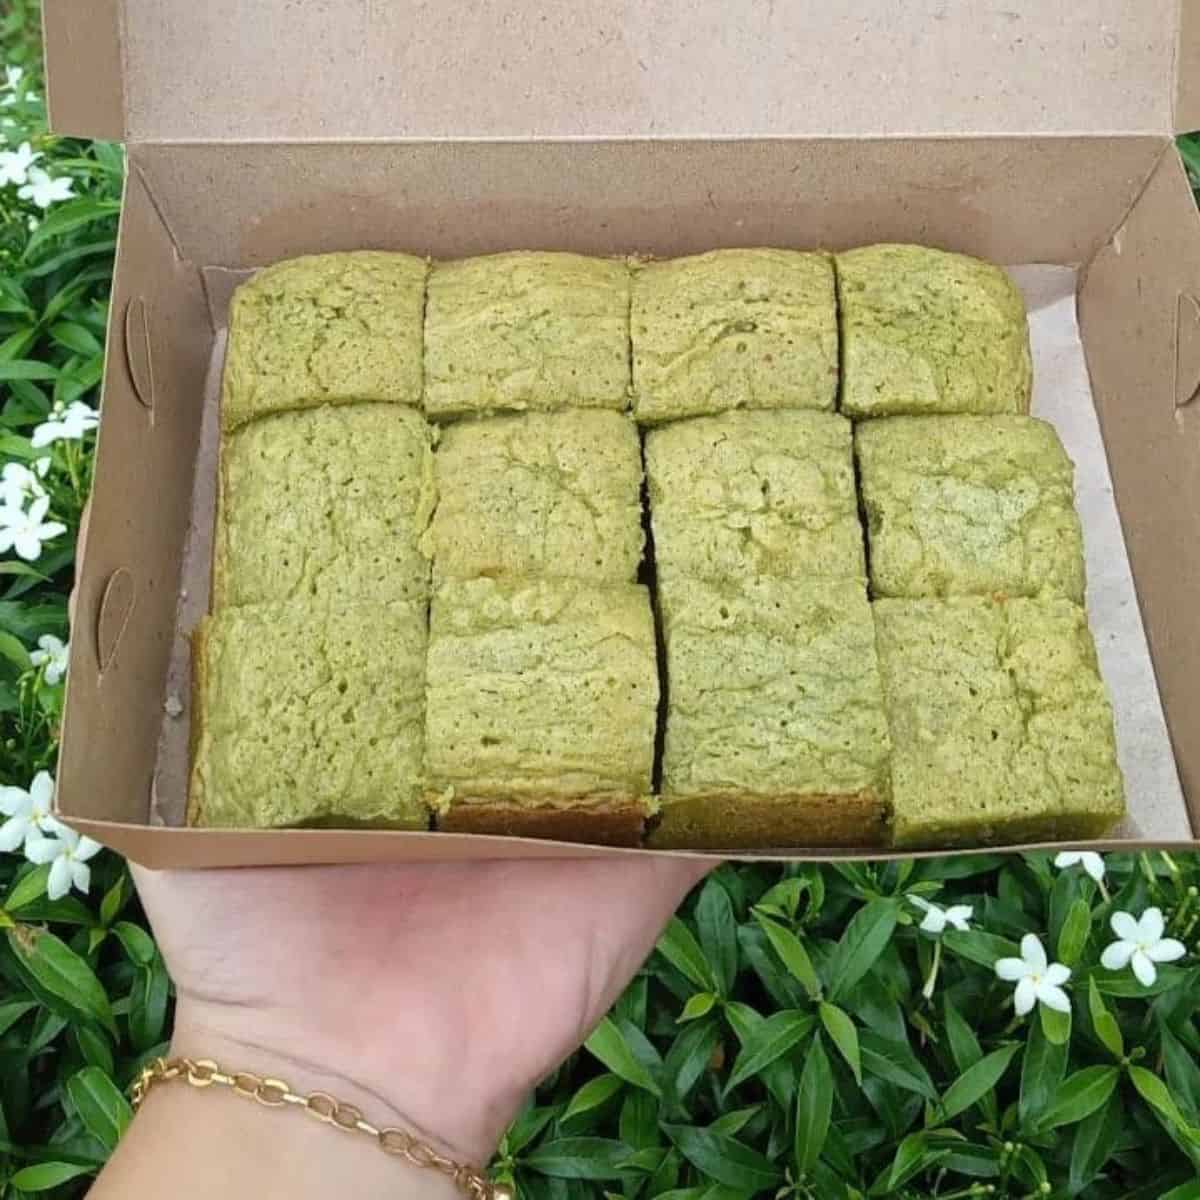 A hand holding Matcha cakes in a brown box